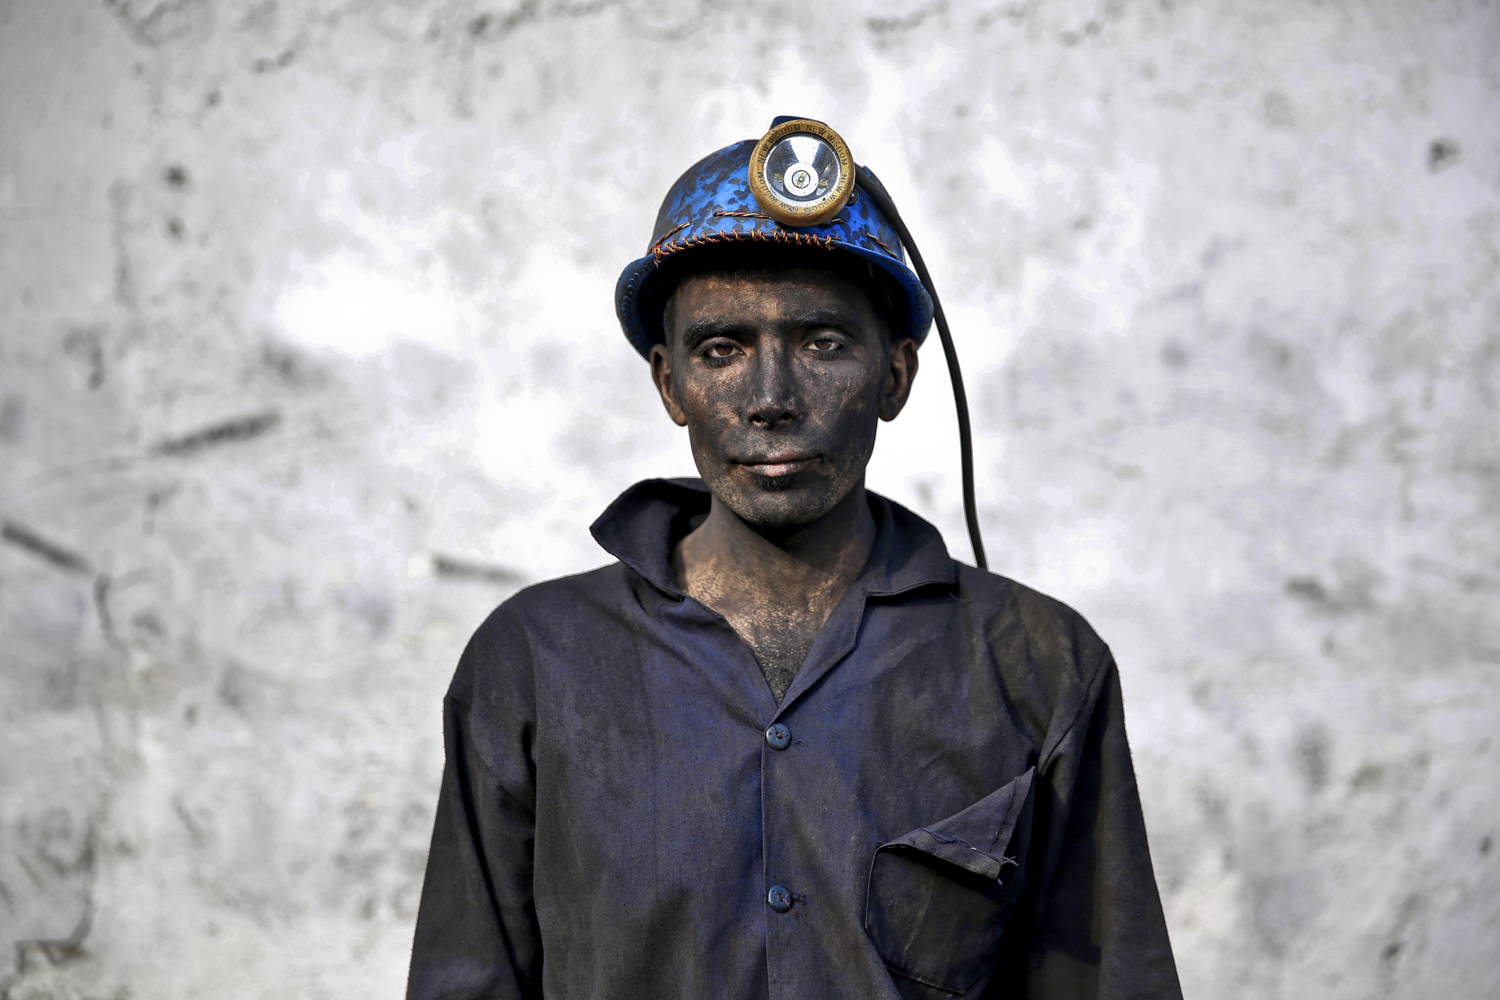 An Iranian coal miner with his face smeared black from coal poses for a photograph at a mine near the city of Zirab, 132 miles northeast of the capital Tehran, on a mountain in Mazandaran province, Iran. May 7, 2014.